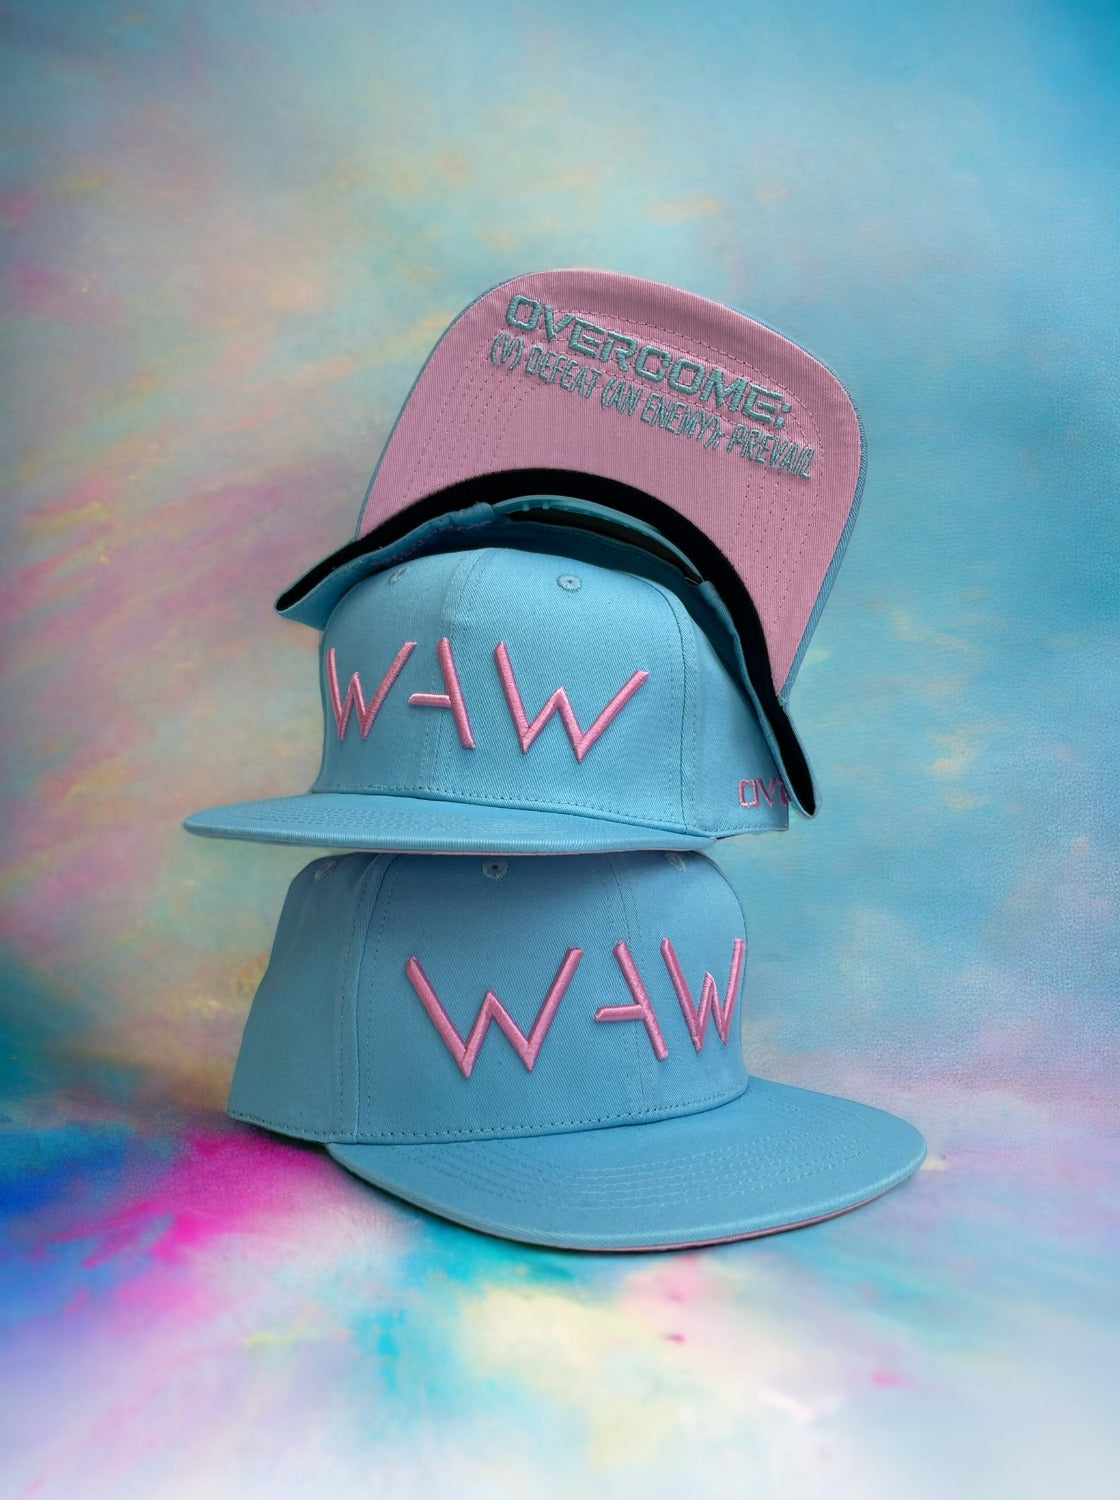 “Reaching for the Sky” Baby Blue and Pink Hat, WeAreWarriorsApparel.com